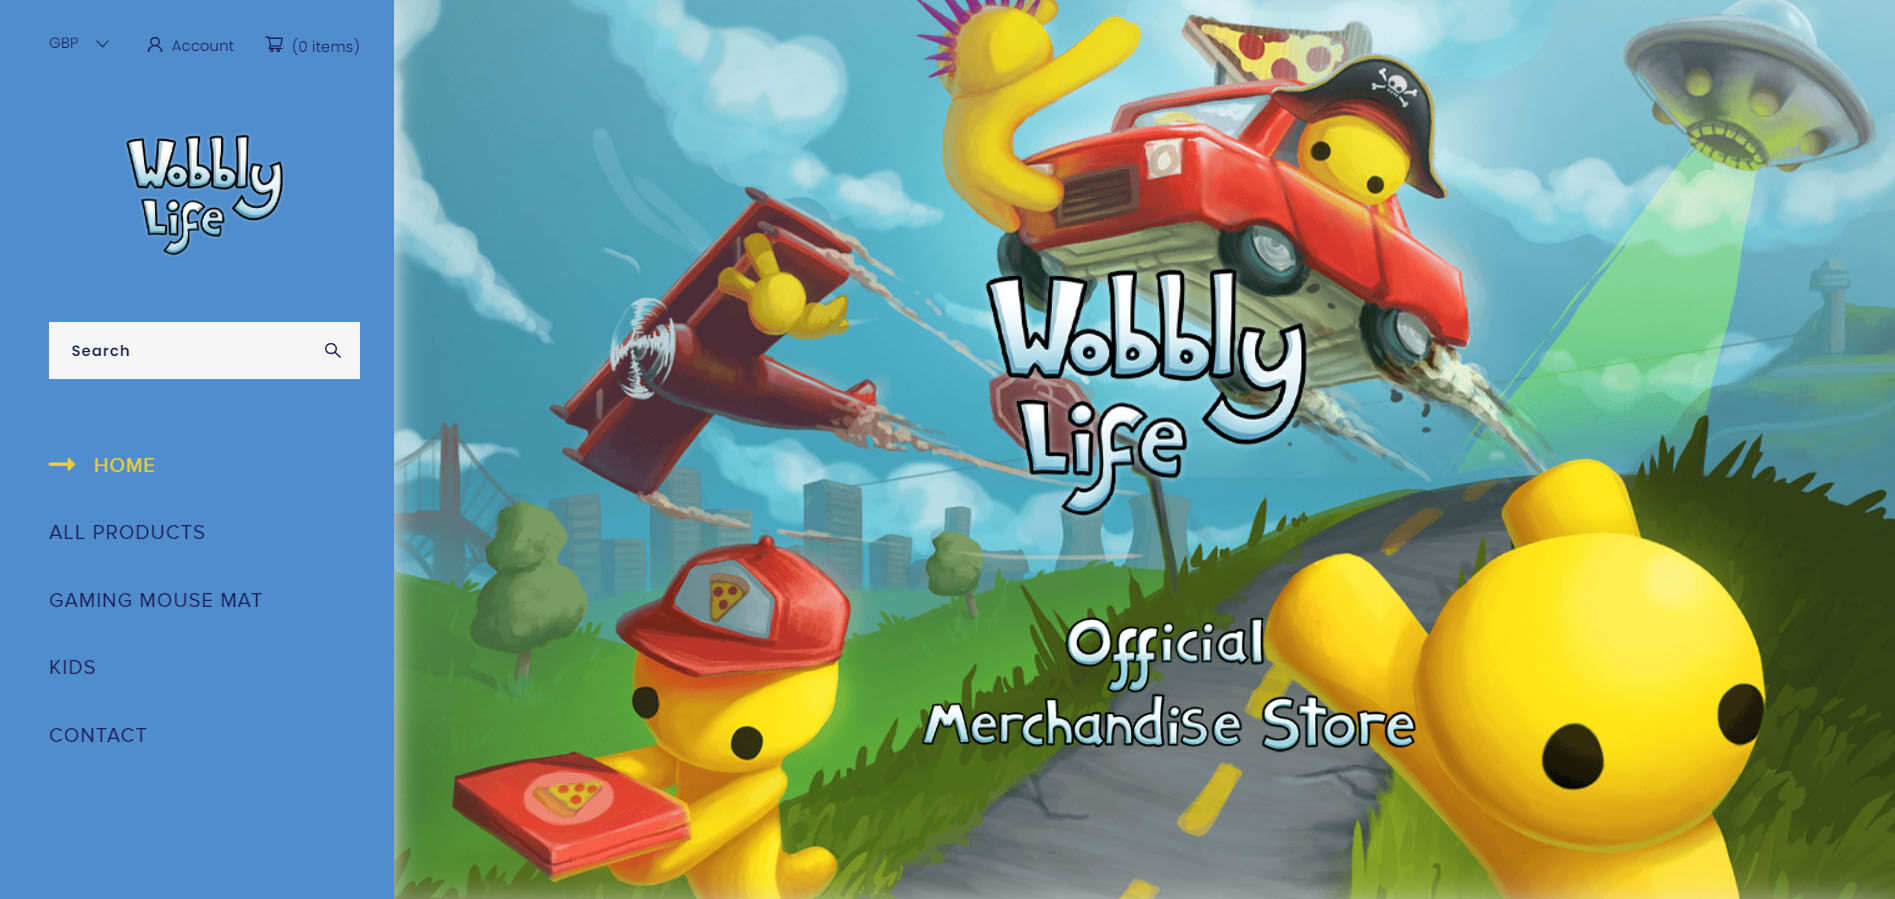 Jelly Delivery, Wobbly Life Wiki